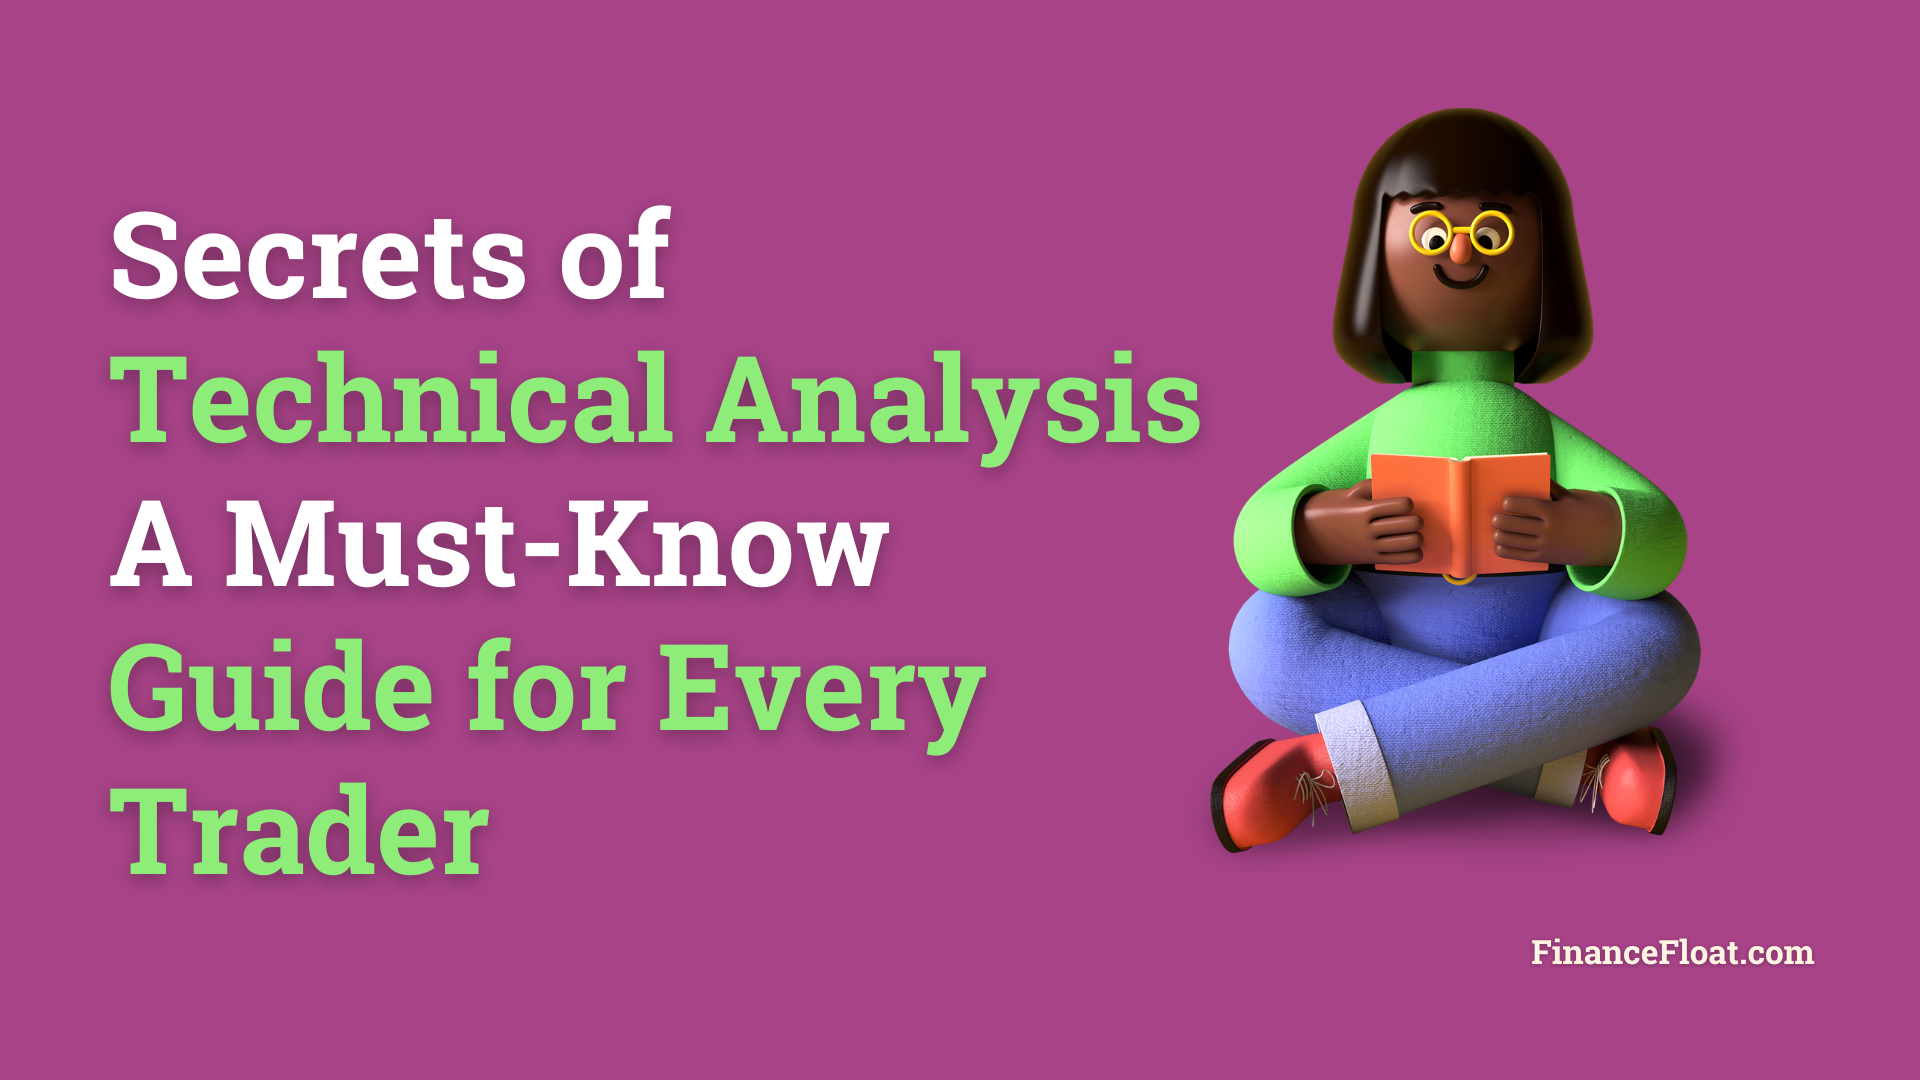 Secrets of Technical Analysis A Must-Know Guide for Every Trader